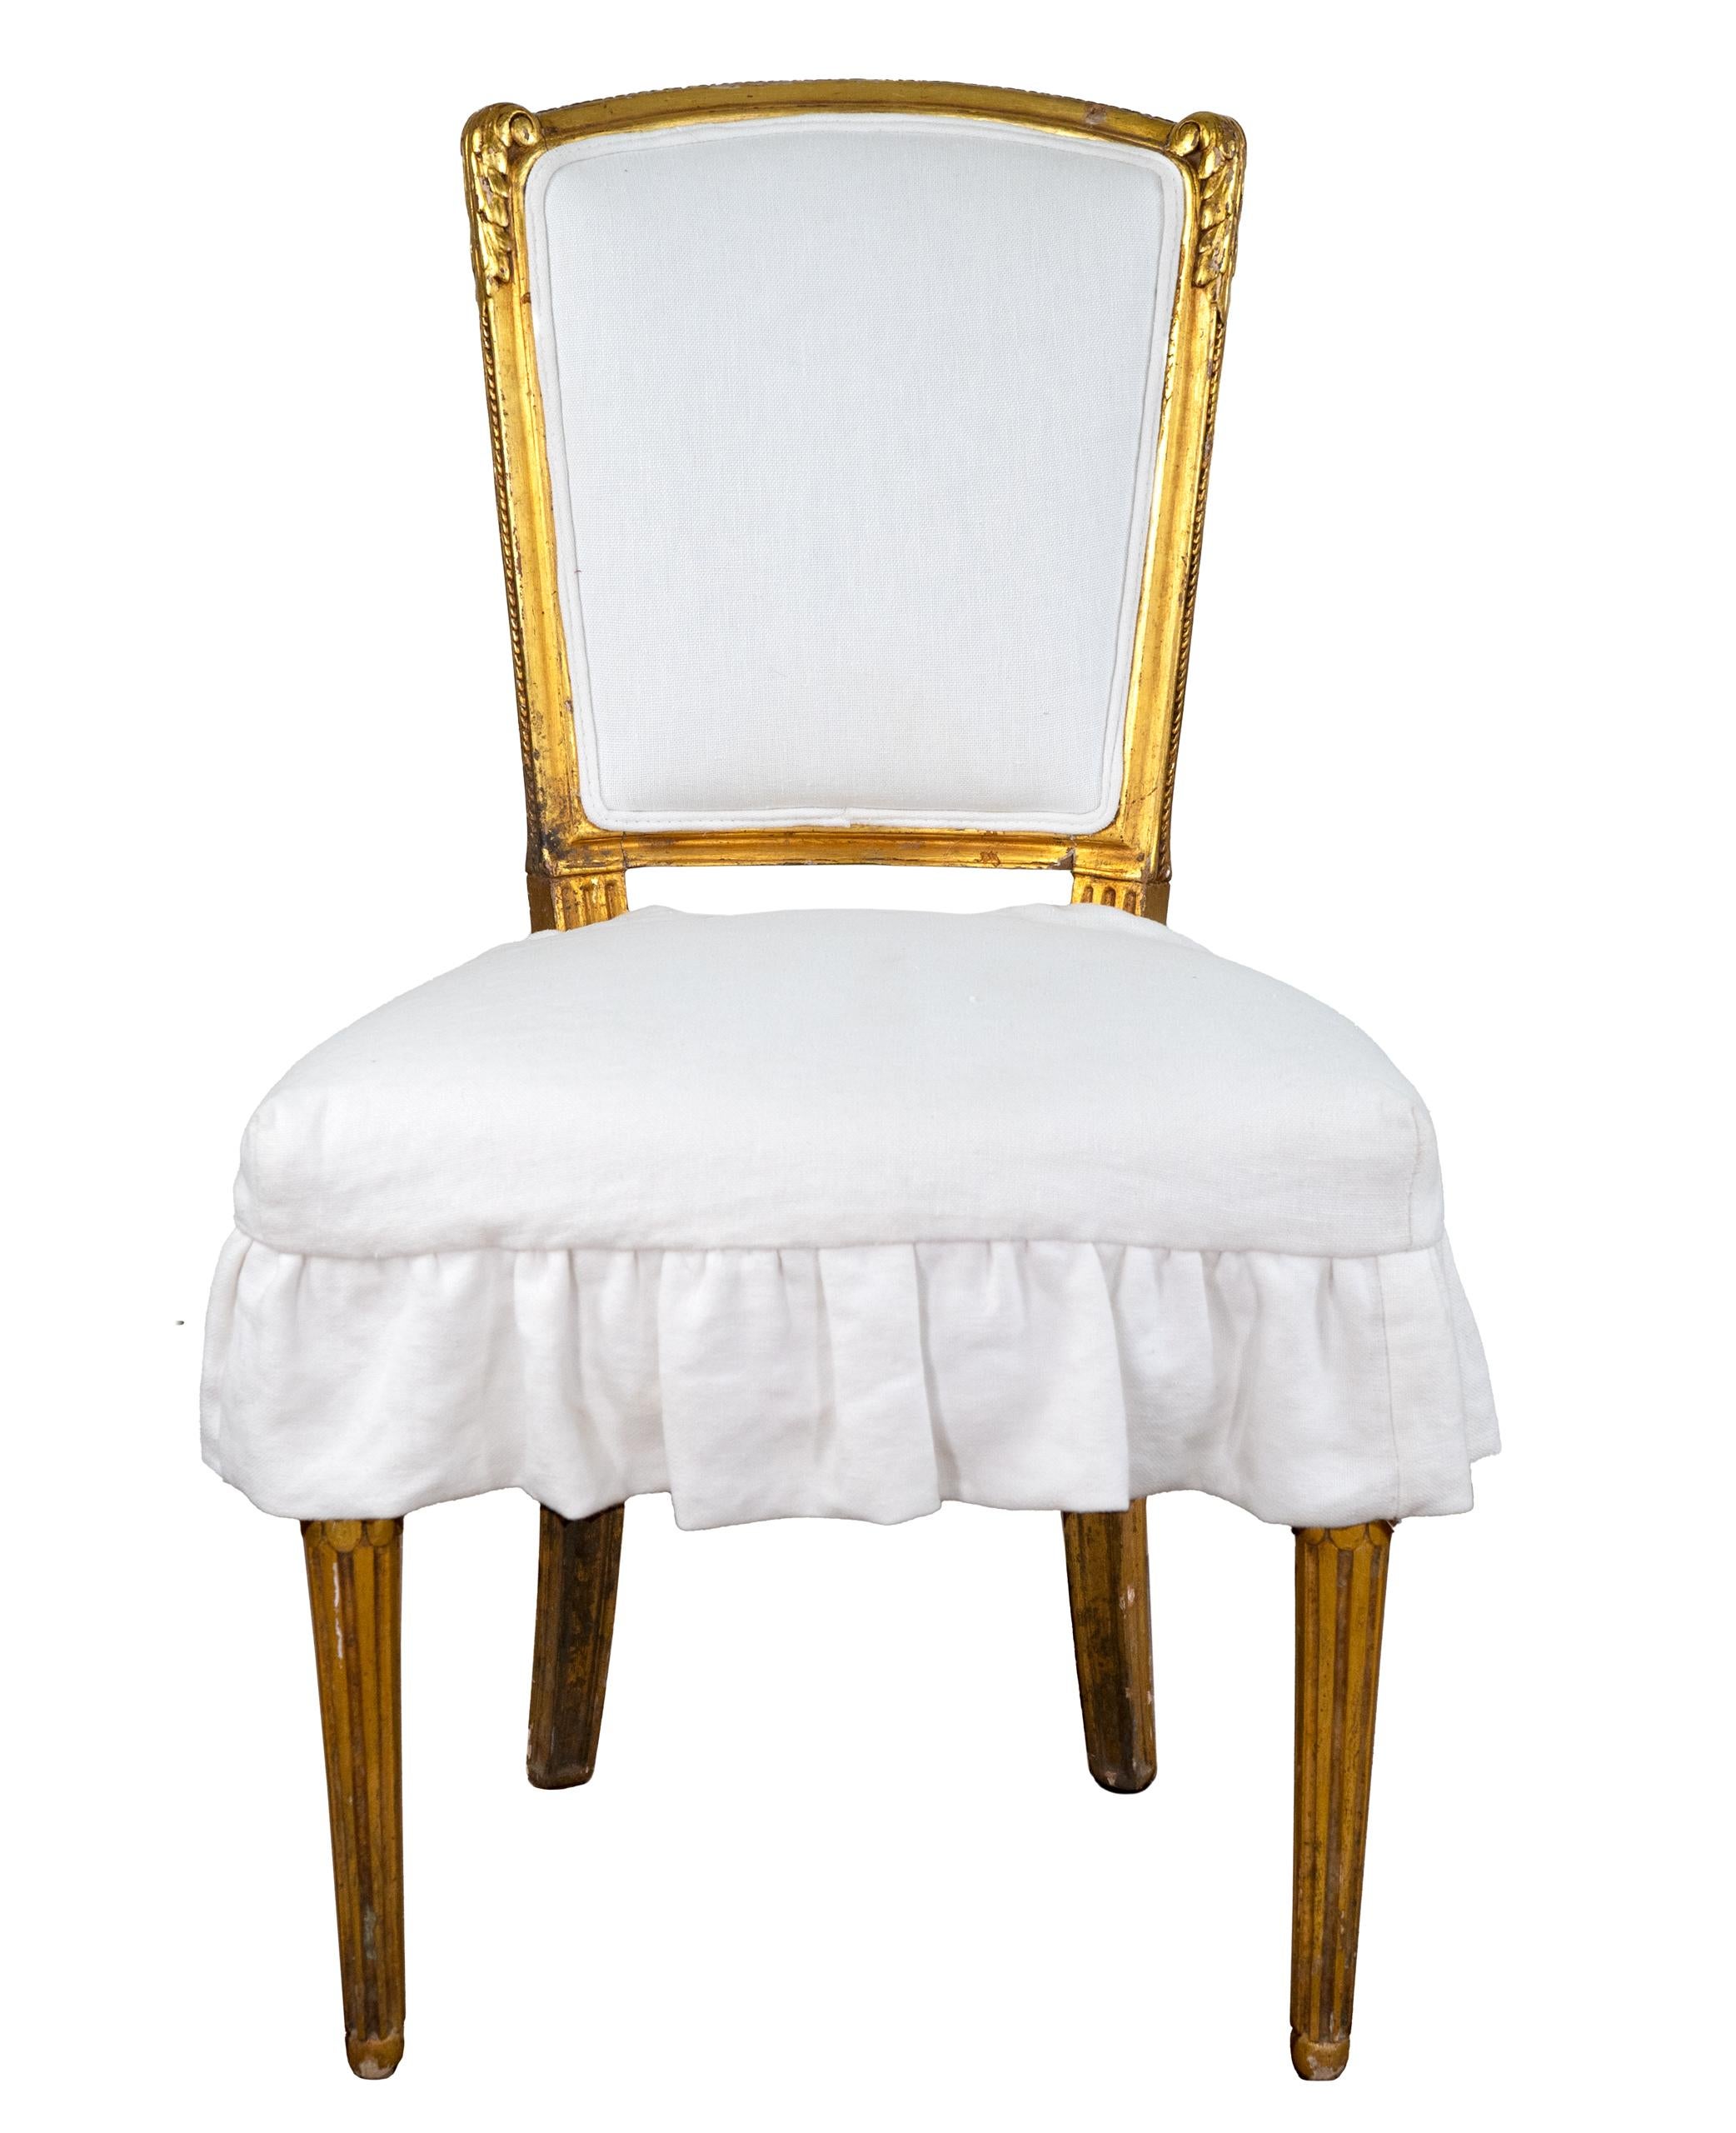 Beautiful pair of antique French gilded accents chairs with new white linen skirted seats. The gilt has areas of aged patina. Wonderful chairs for any area.